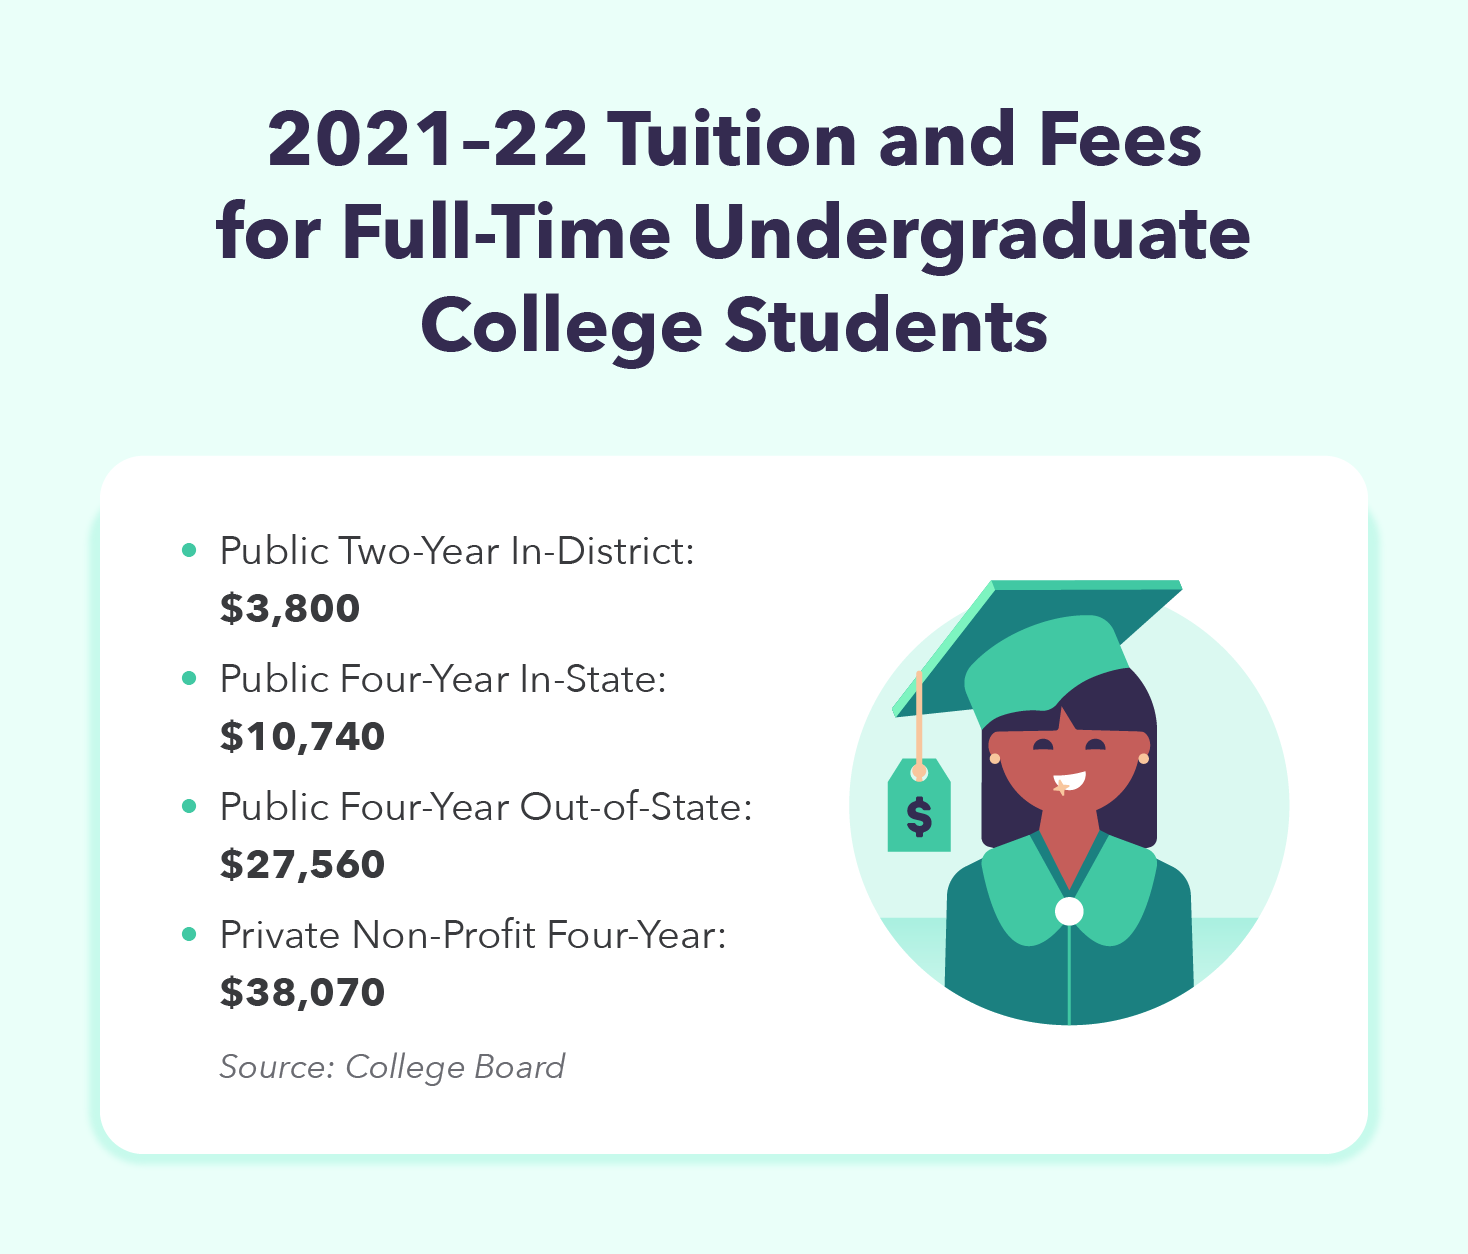 tuition-and-fees-for-full-time-undergraduate-students